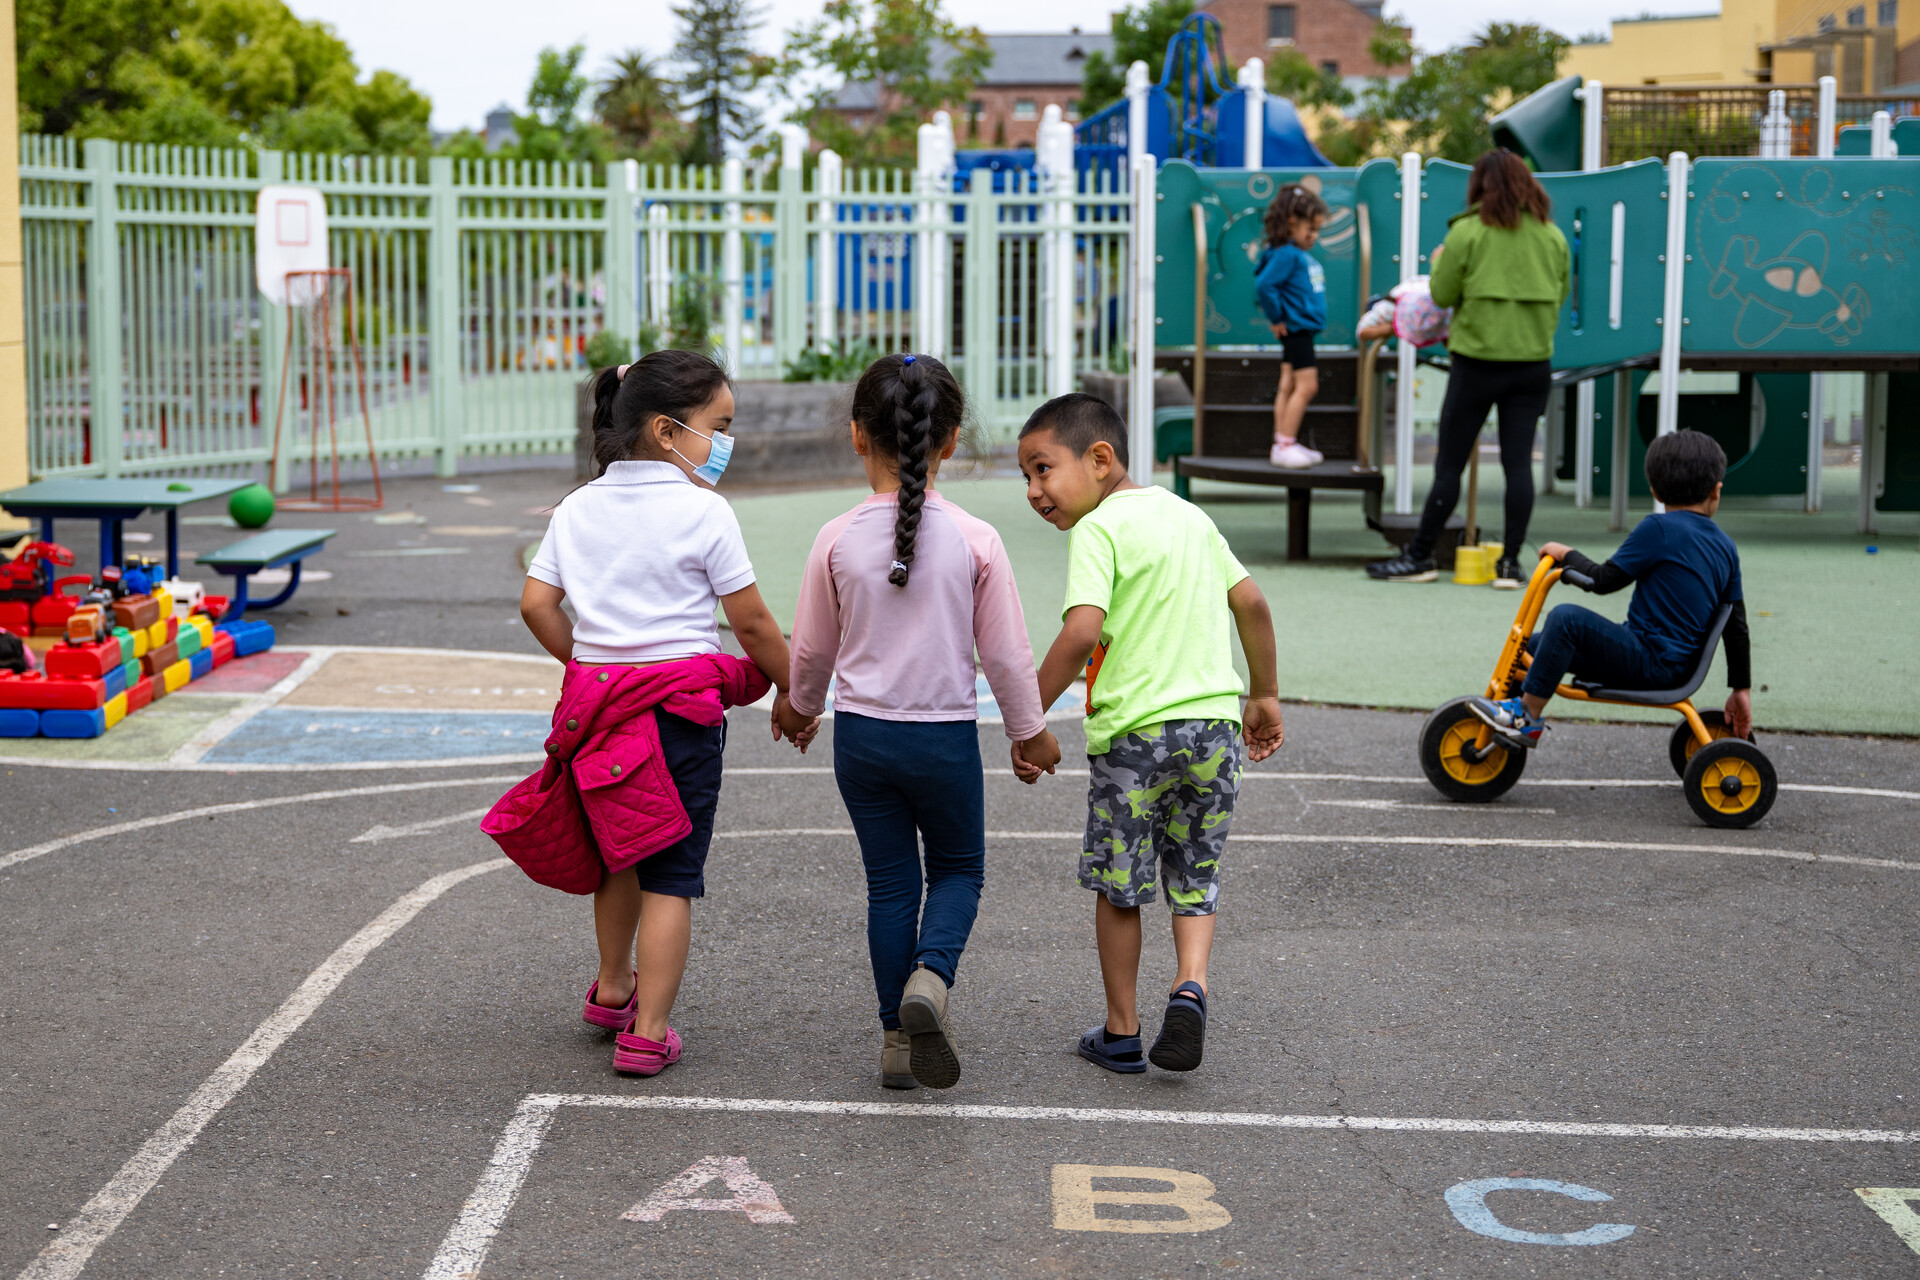 Three young students hold hands outside as they walk away from the camera towards a play gym structure during recess